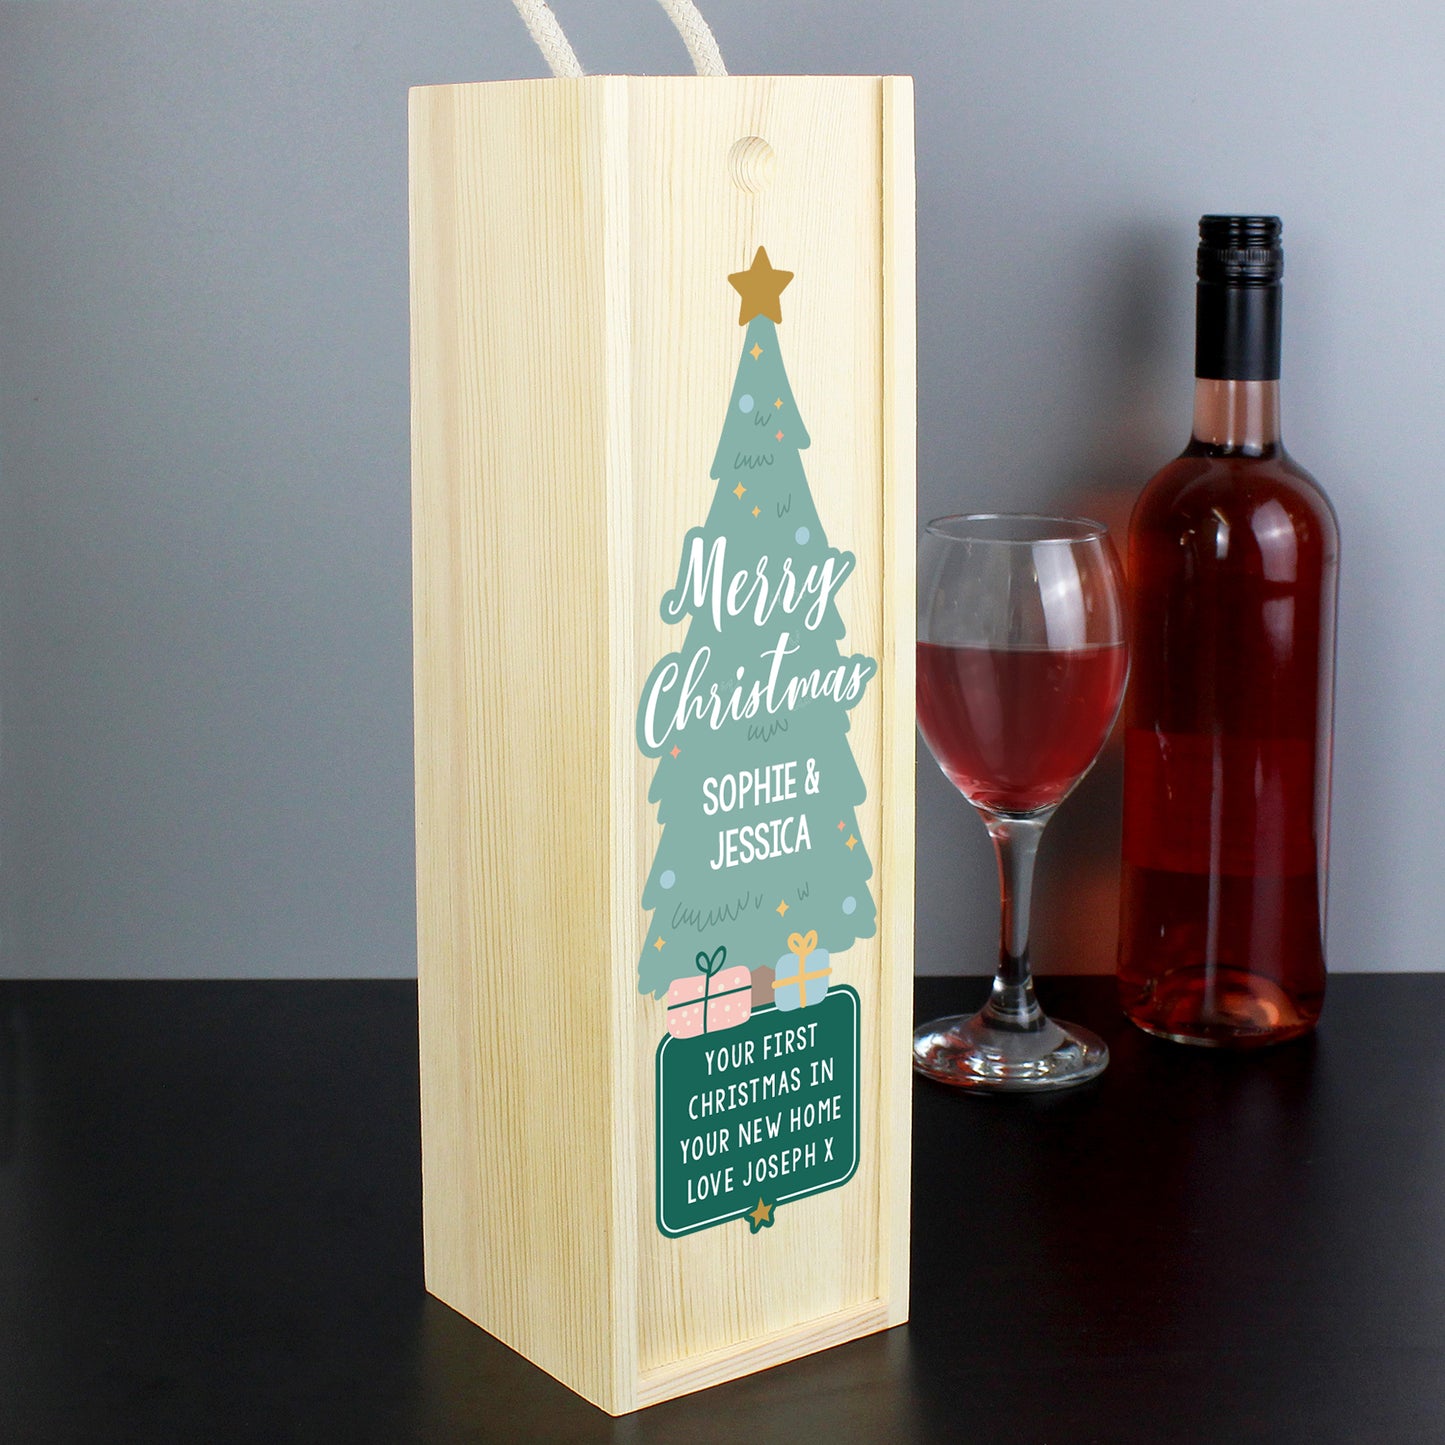 Personalised Merry Christmas Wooden Wine Bottle Box - Personalise It!